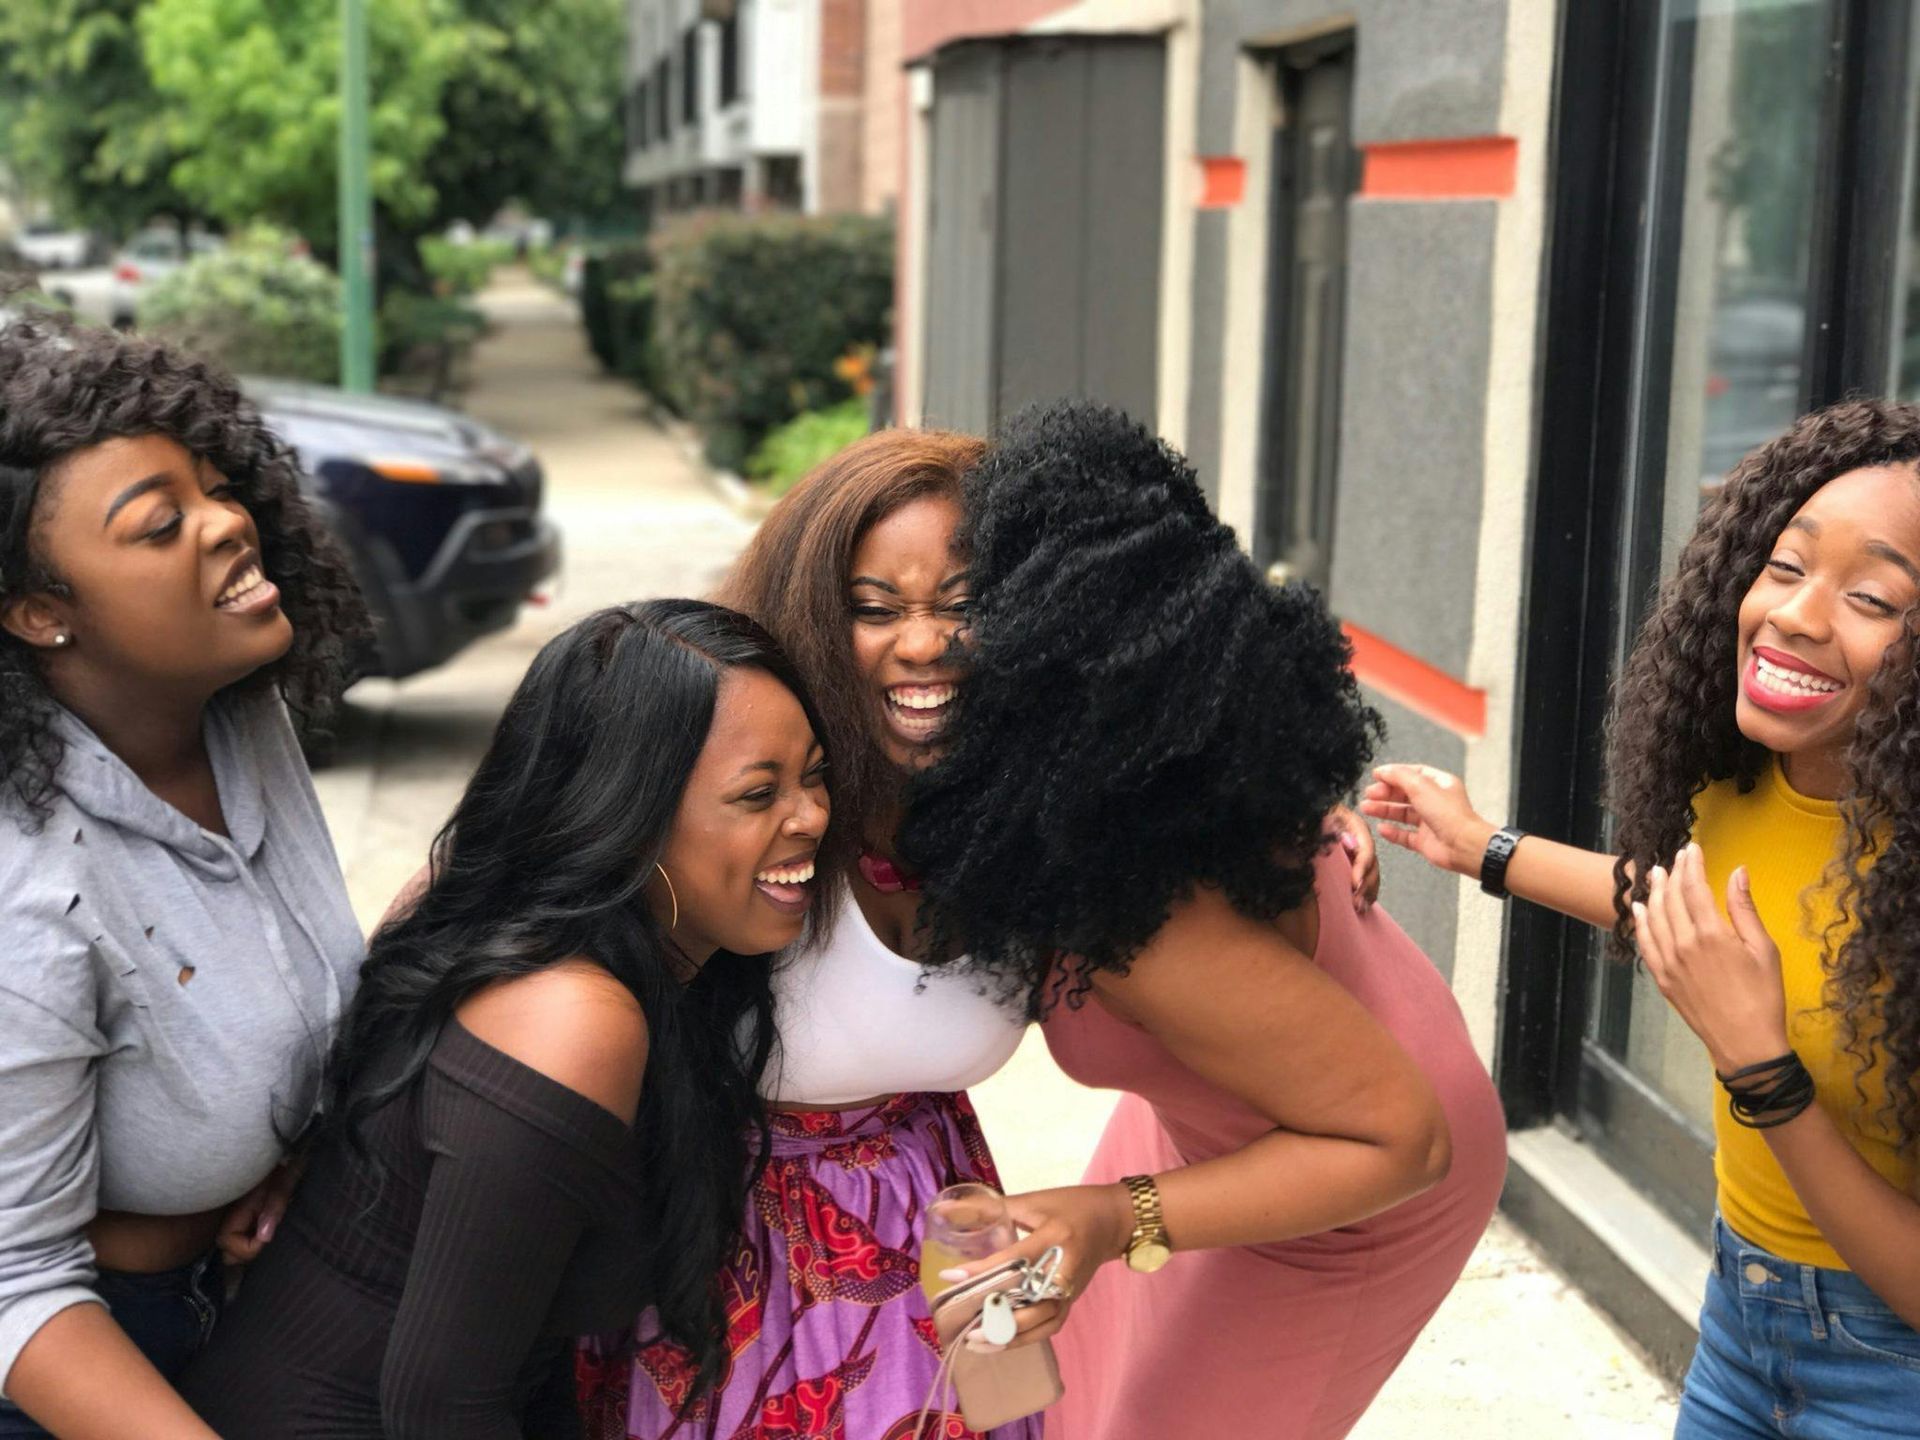 A group of women are standing next to each other on a sidewalk and smiling.